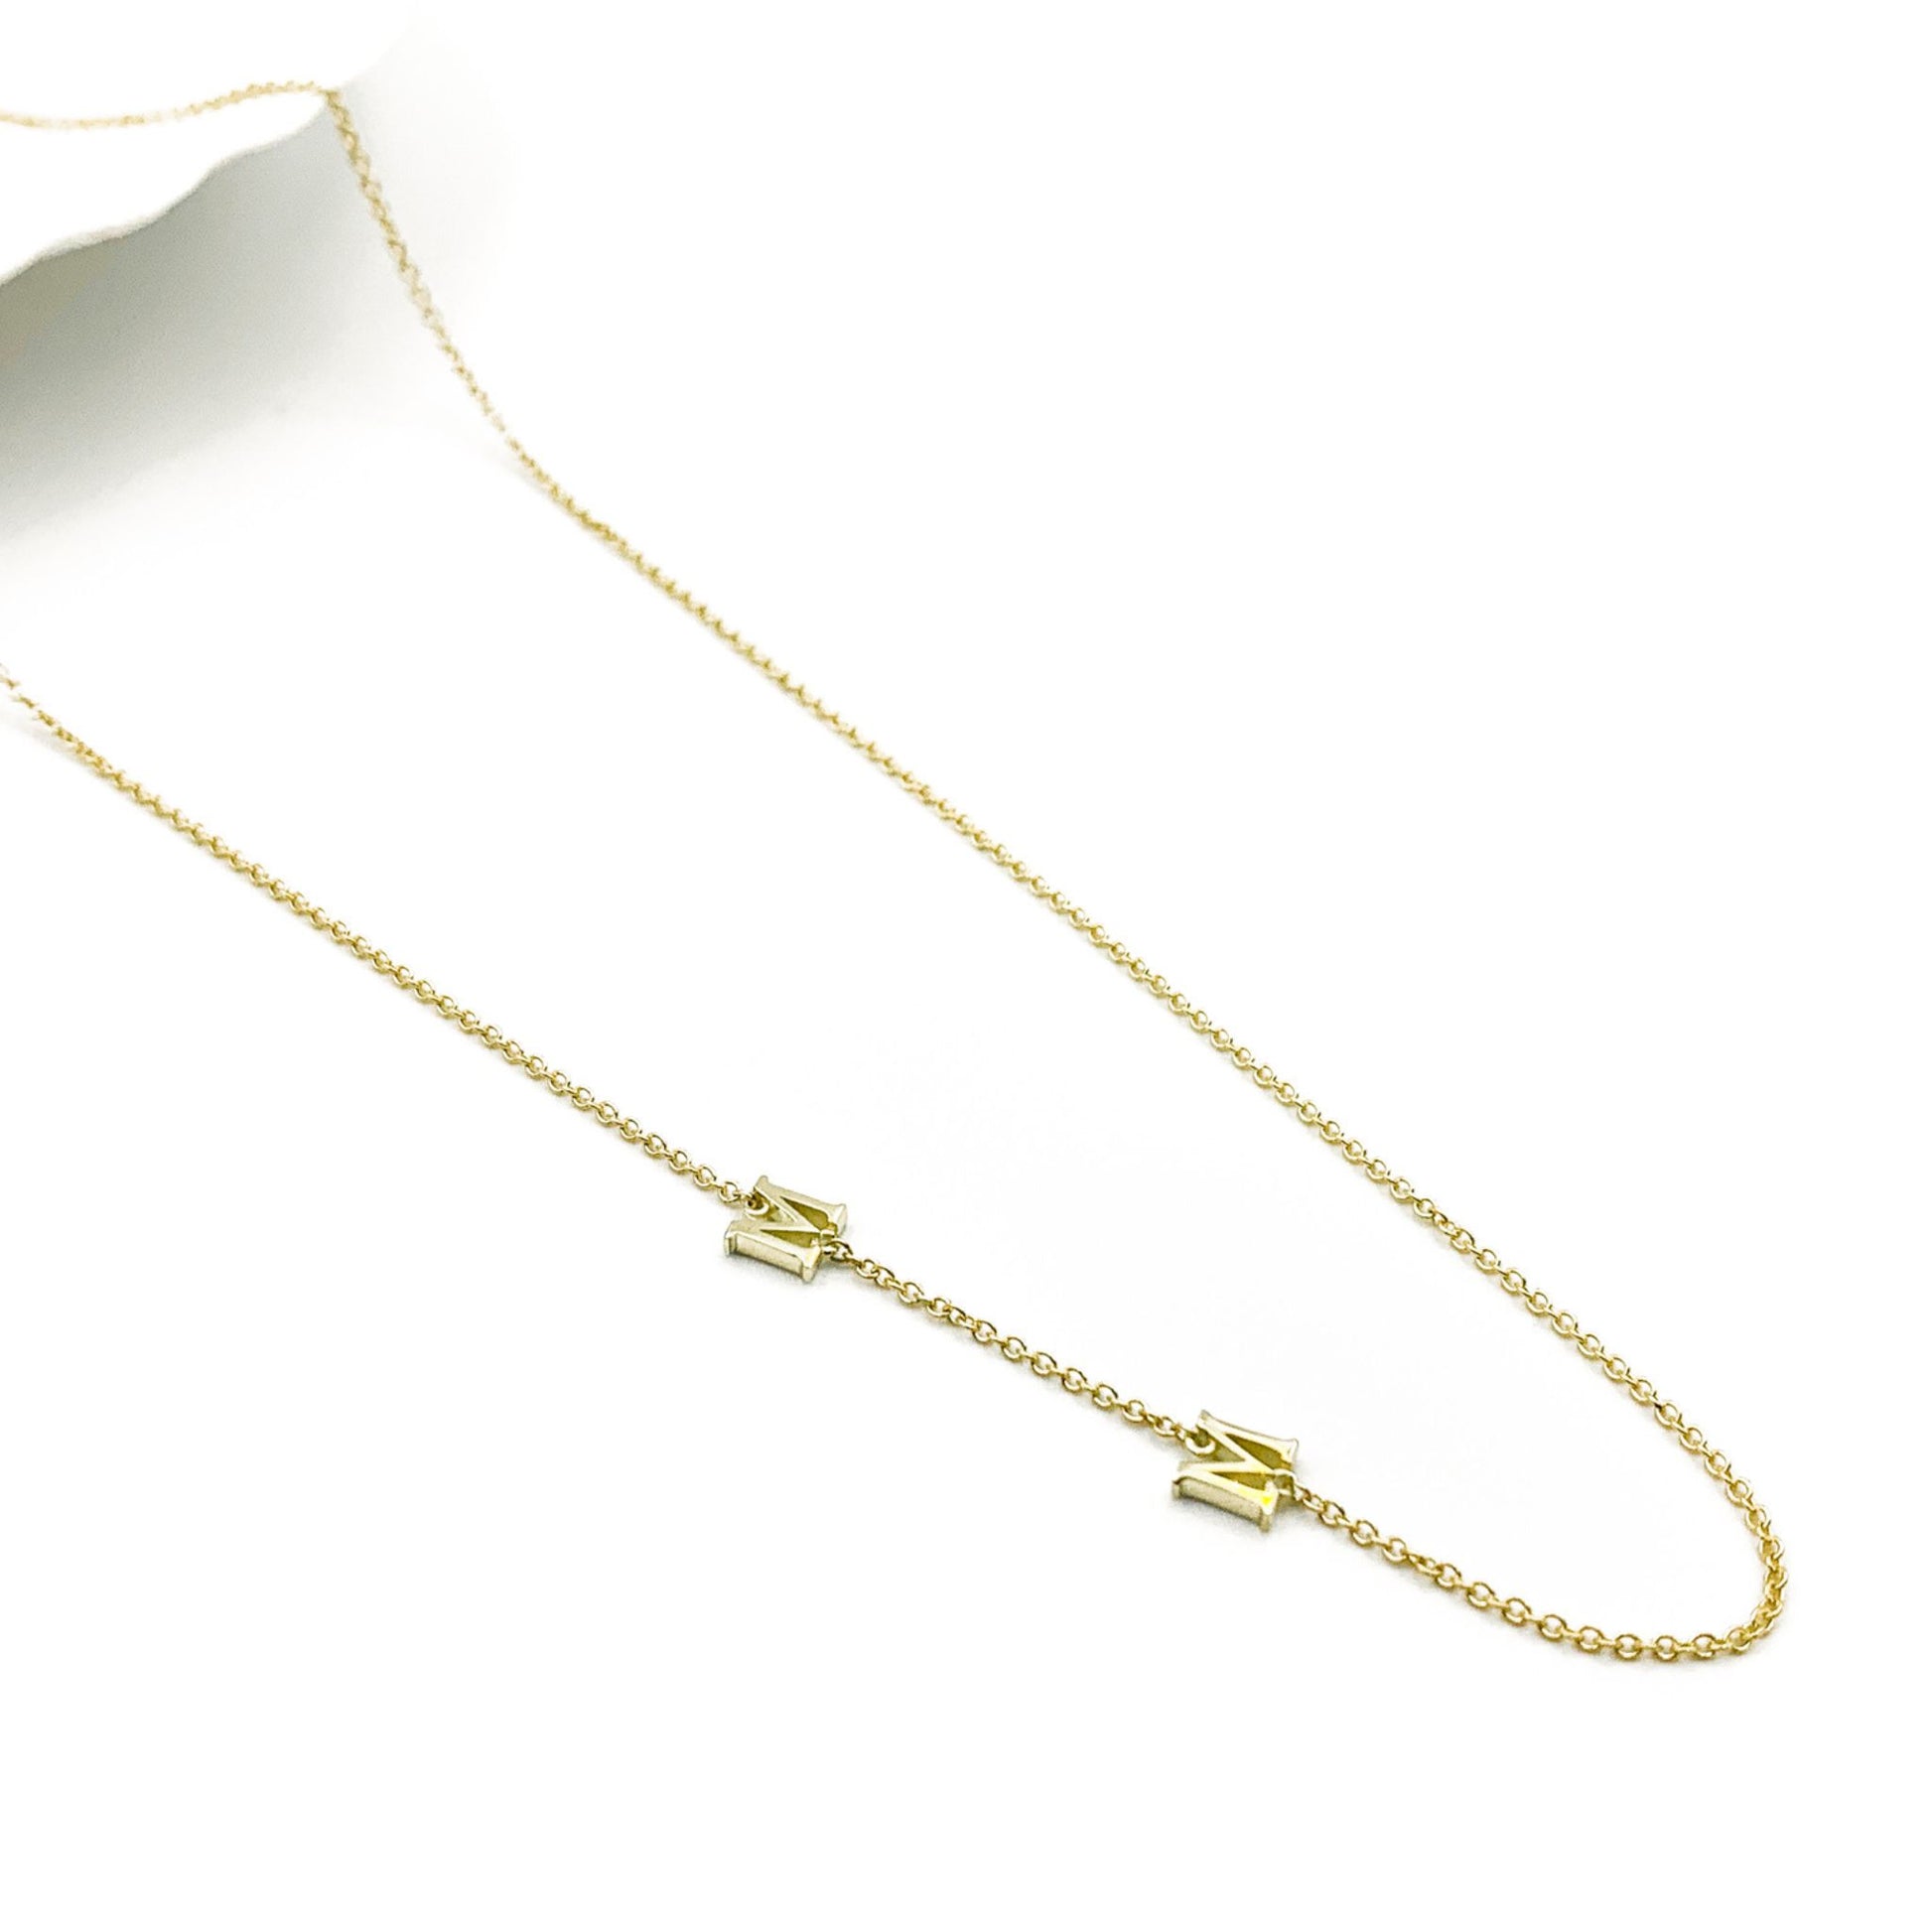 9ct yellow gold personalized 'M' initial necklace 